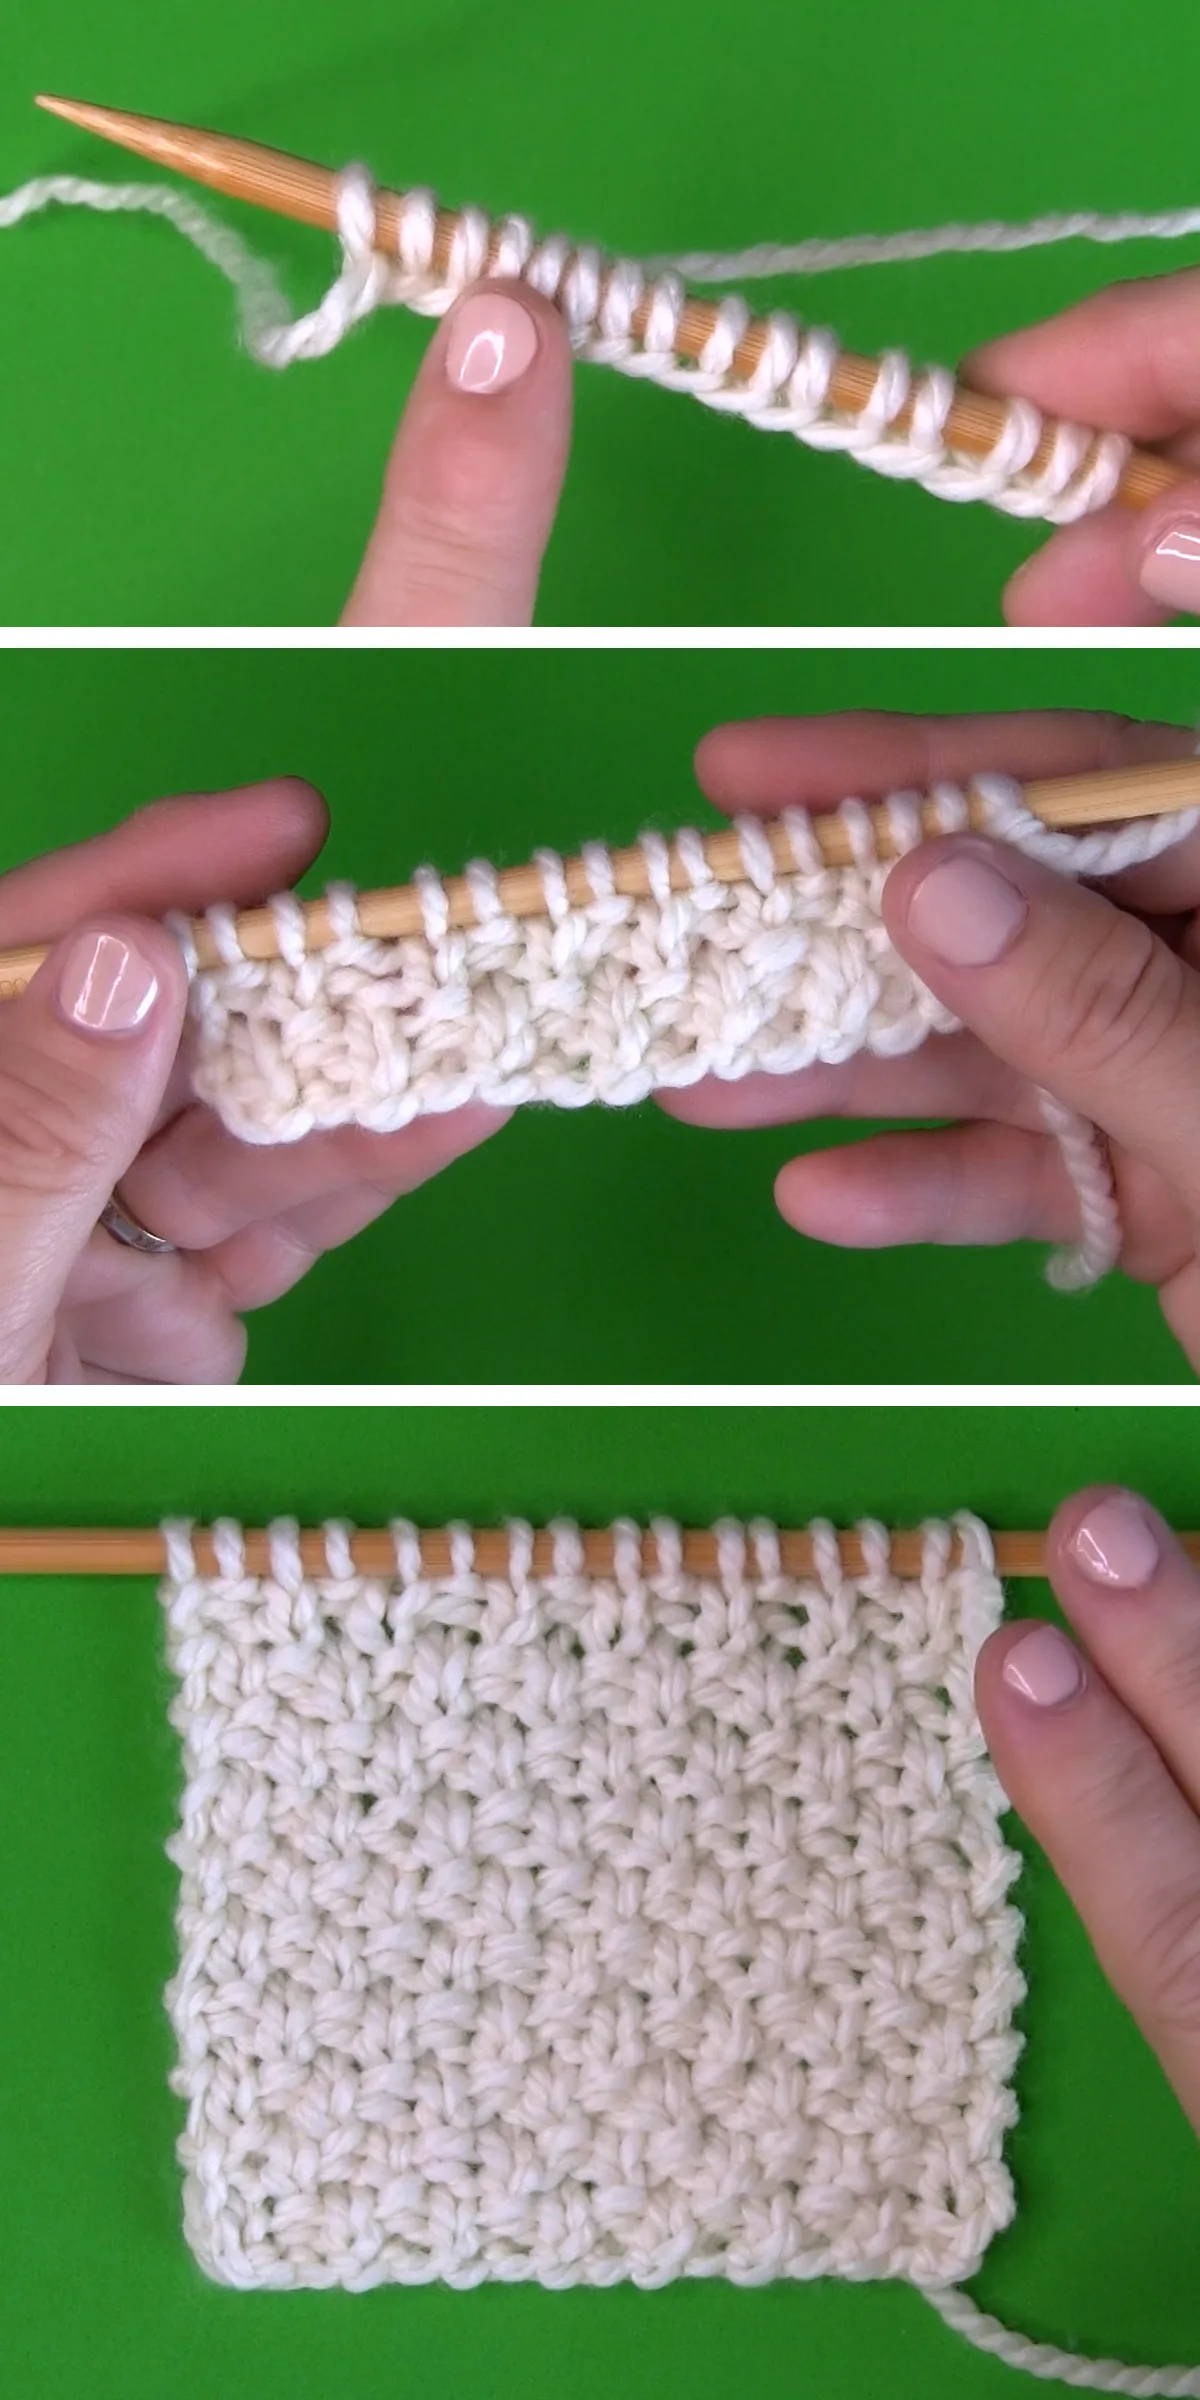 Hands demonstrating steps to knitting the Irish Moss Stitch with needles and yarn.